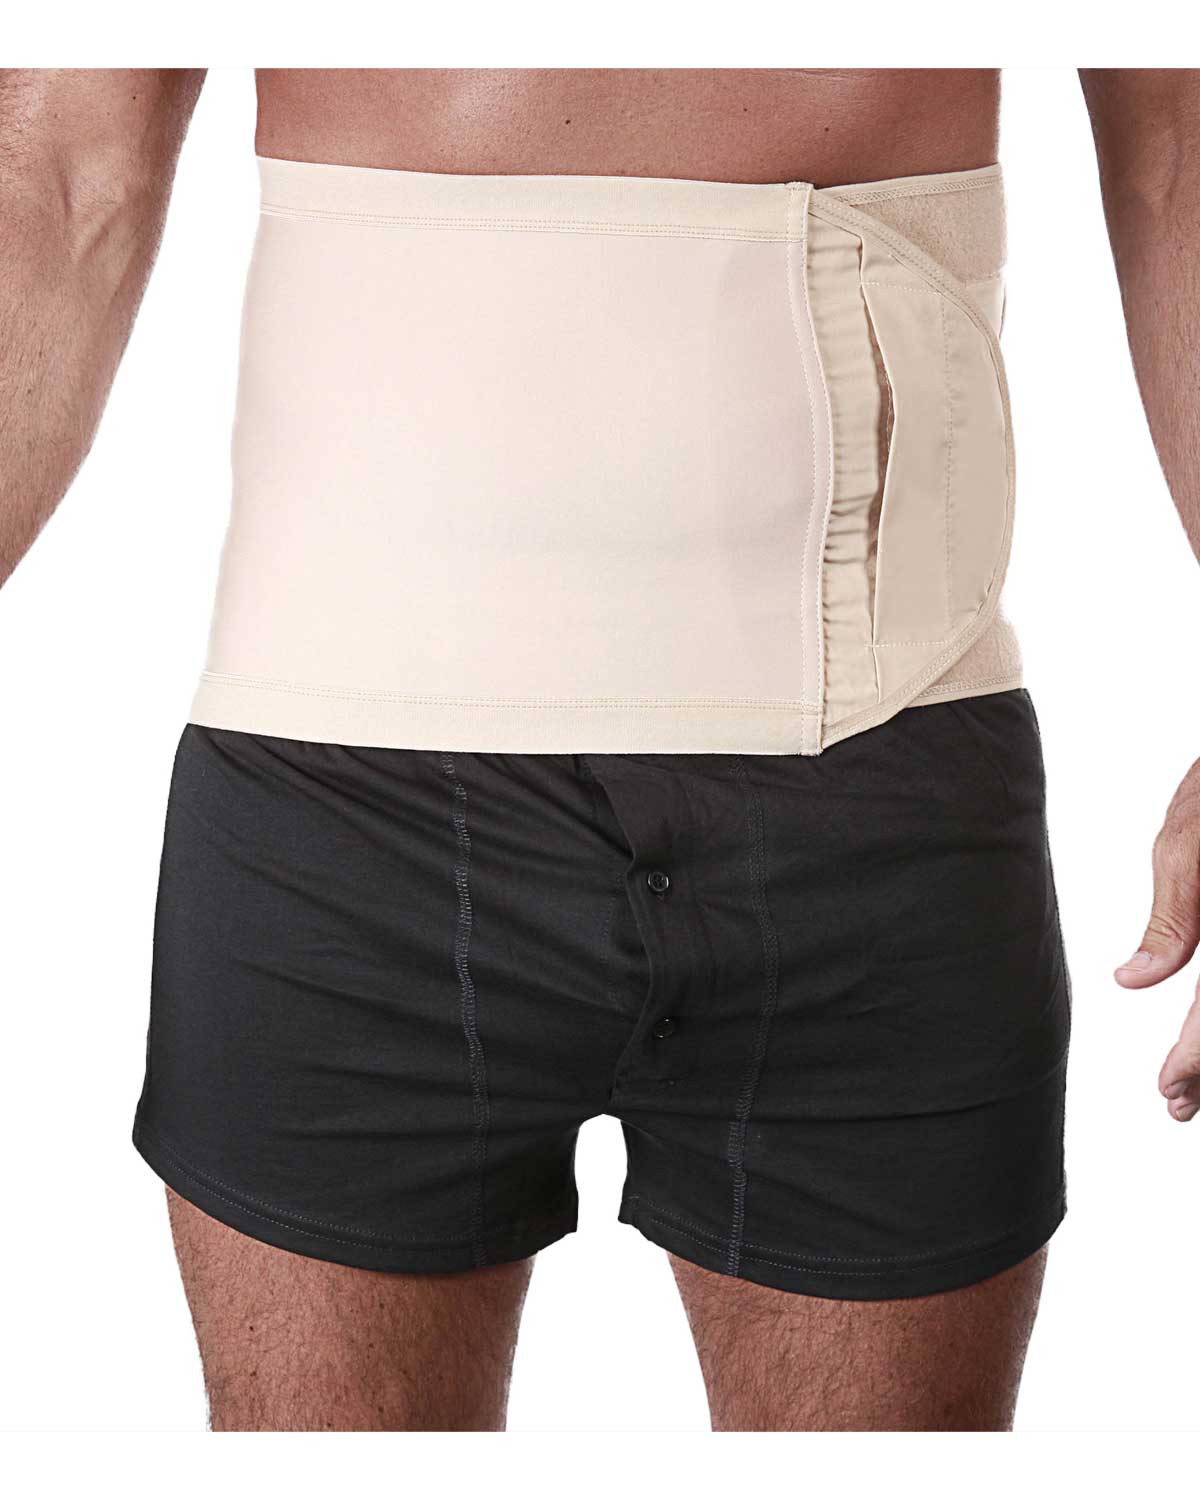 CUI Unisex Anti Roll Wraparound Ostomy Hernia Support Belt - 26cm/10inch - 1 each, 26 CM / 10 INCH, LARGE - WHITE - NO OPENING